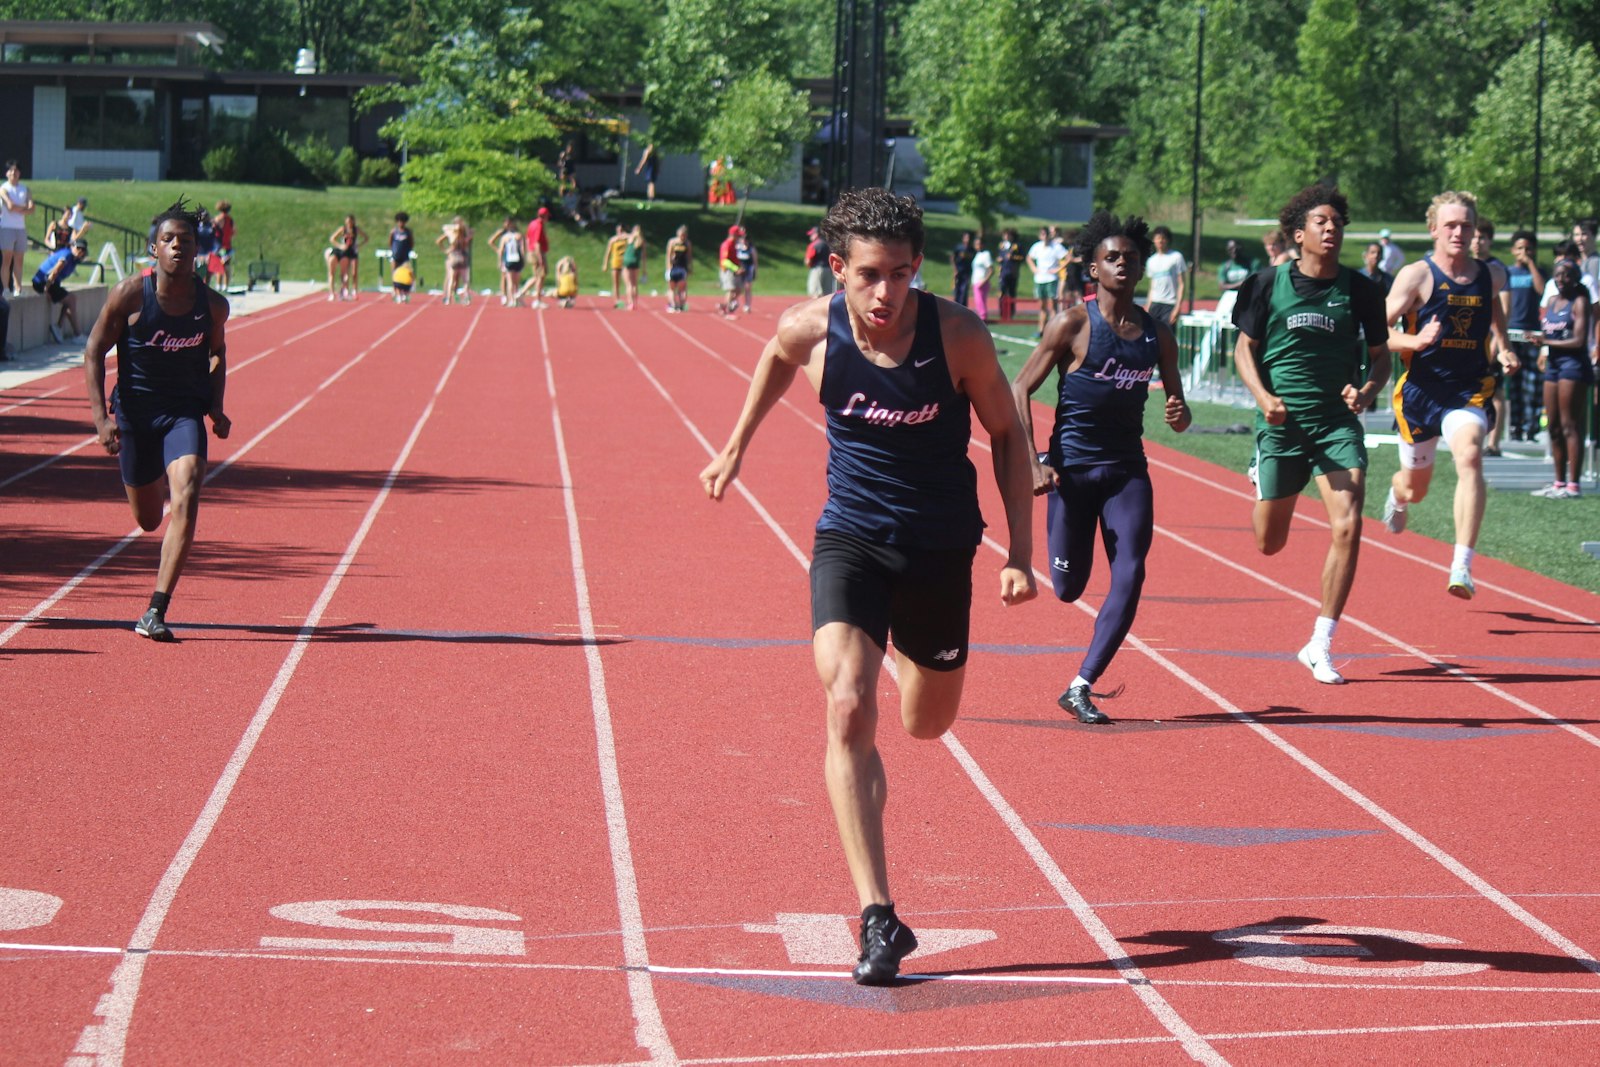 With teammates James McCullough and Pierre Walker II to the left and right, Grosse Pointe Woods University-Liggett’s Santino Cicarella wins the 100-meter dash. He also finished first in the 200 and 400 dashes.